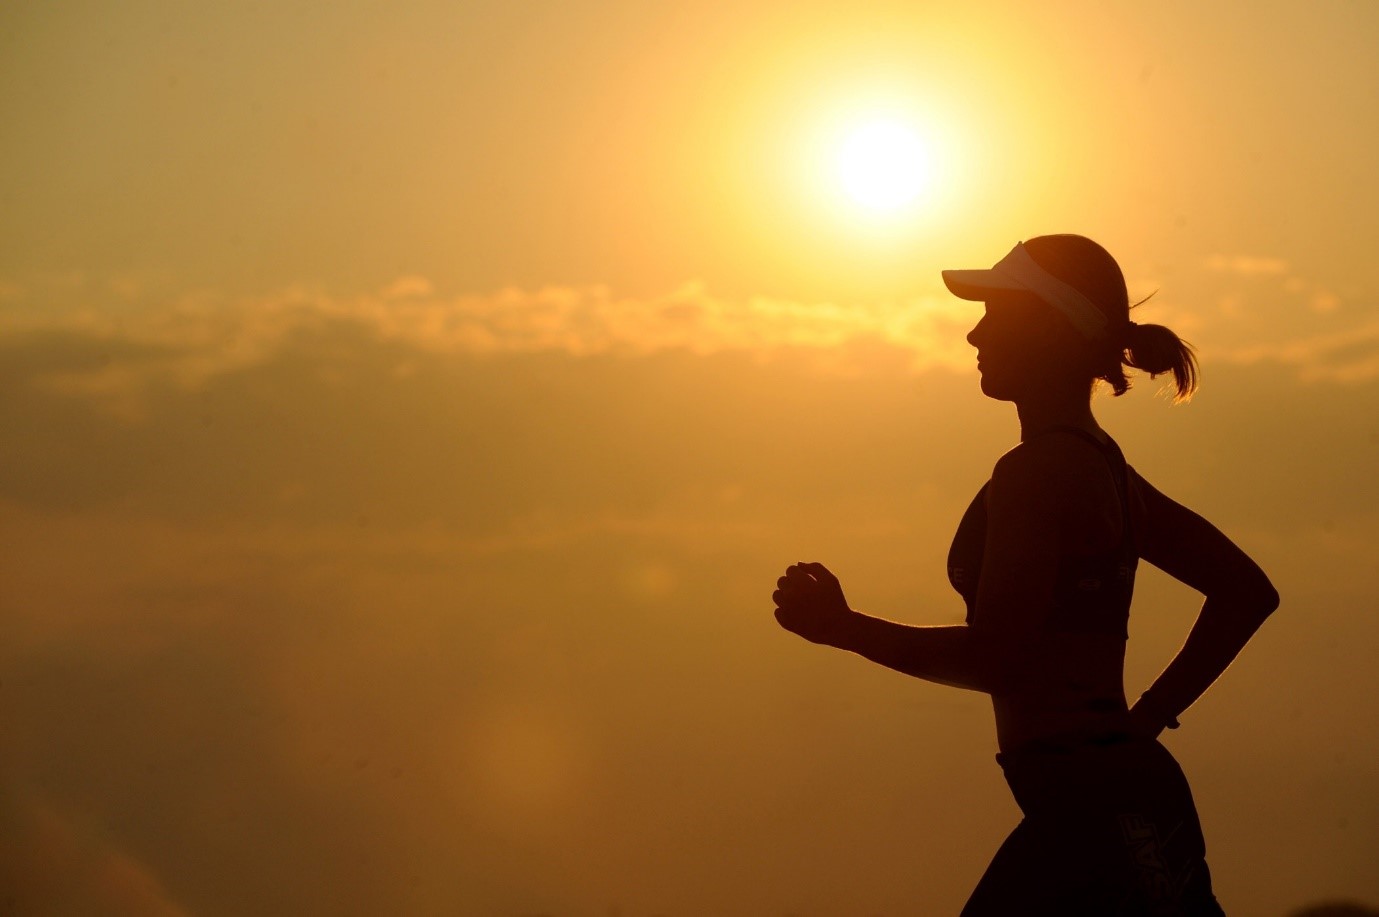 Silhouette of a woman runner against a sunset